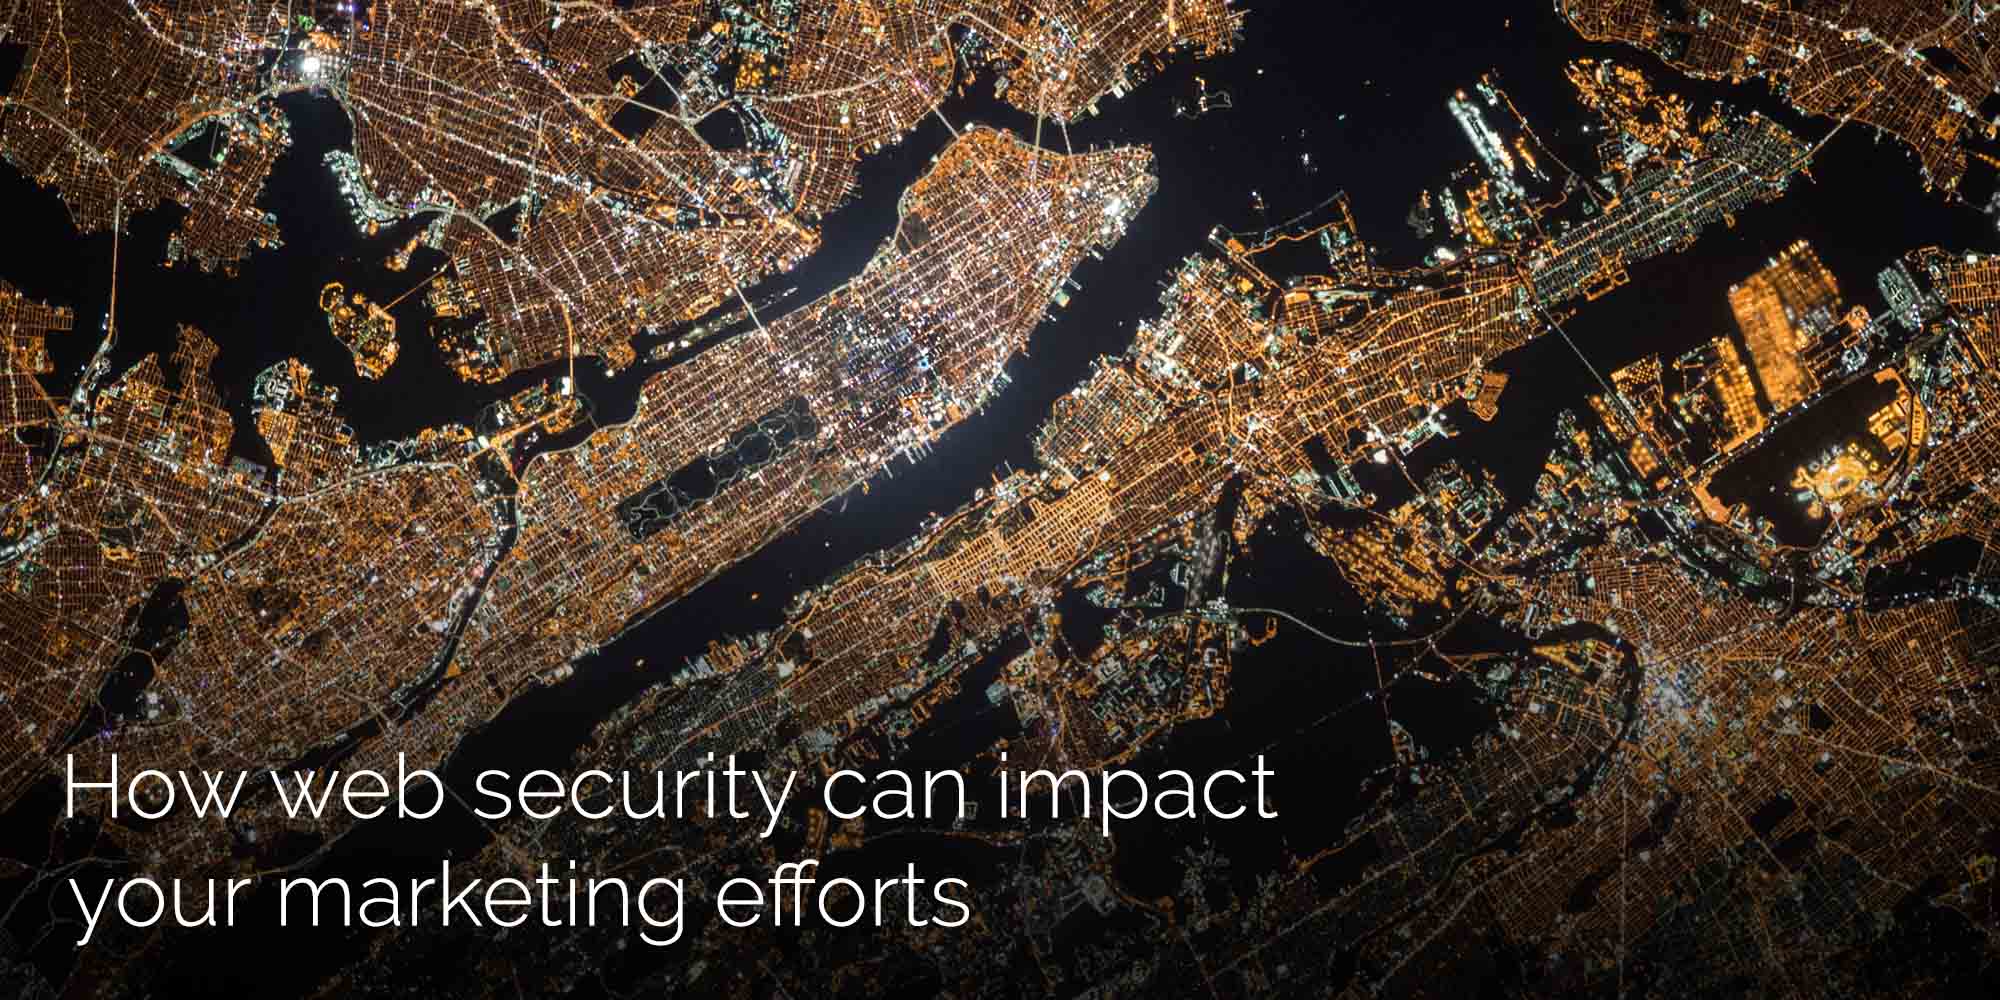 How website security can impact your marketing efforts